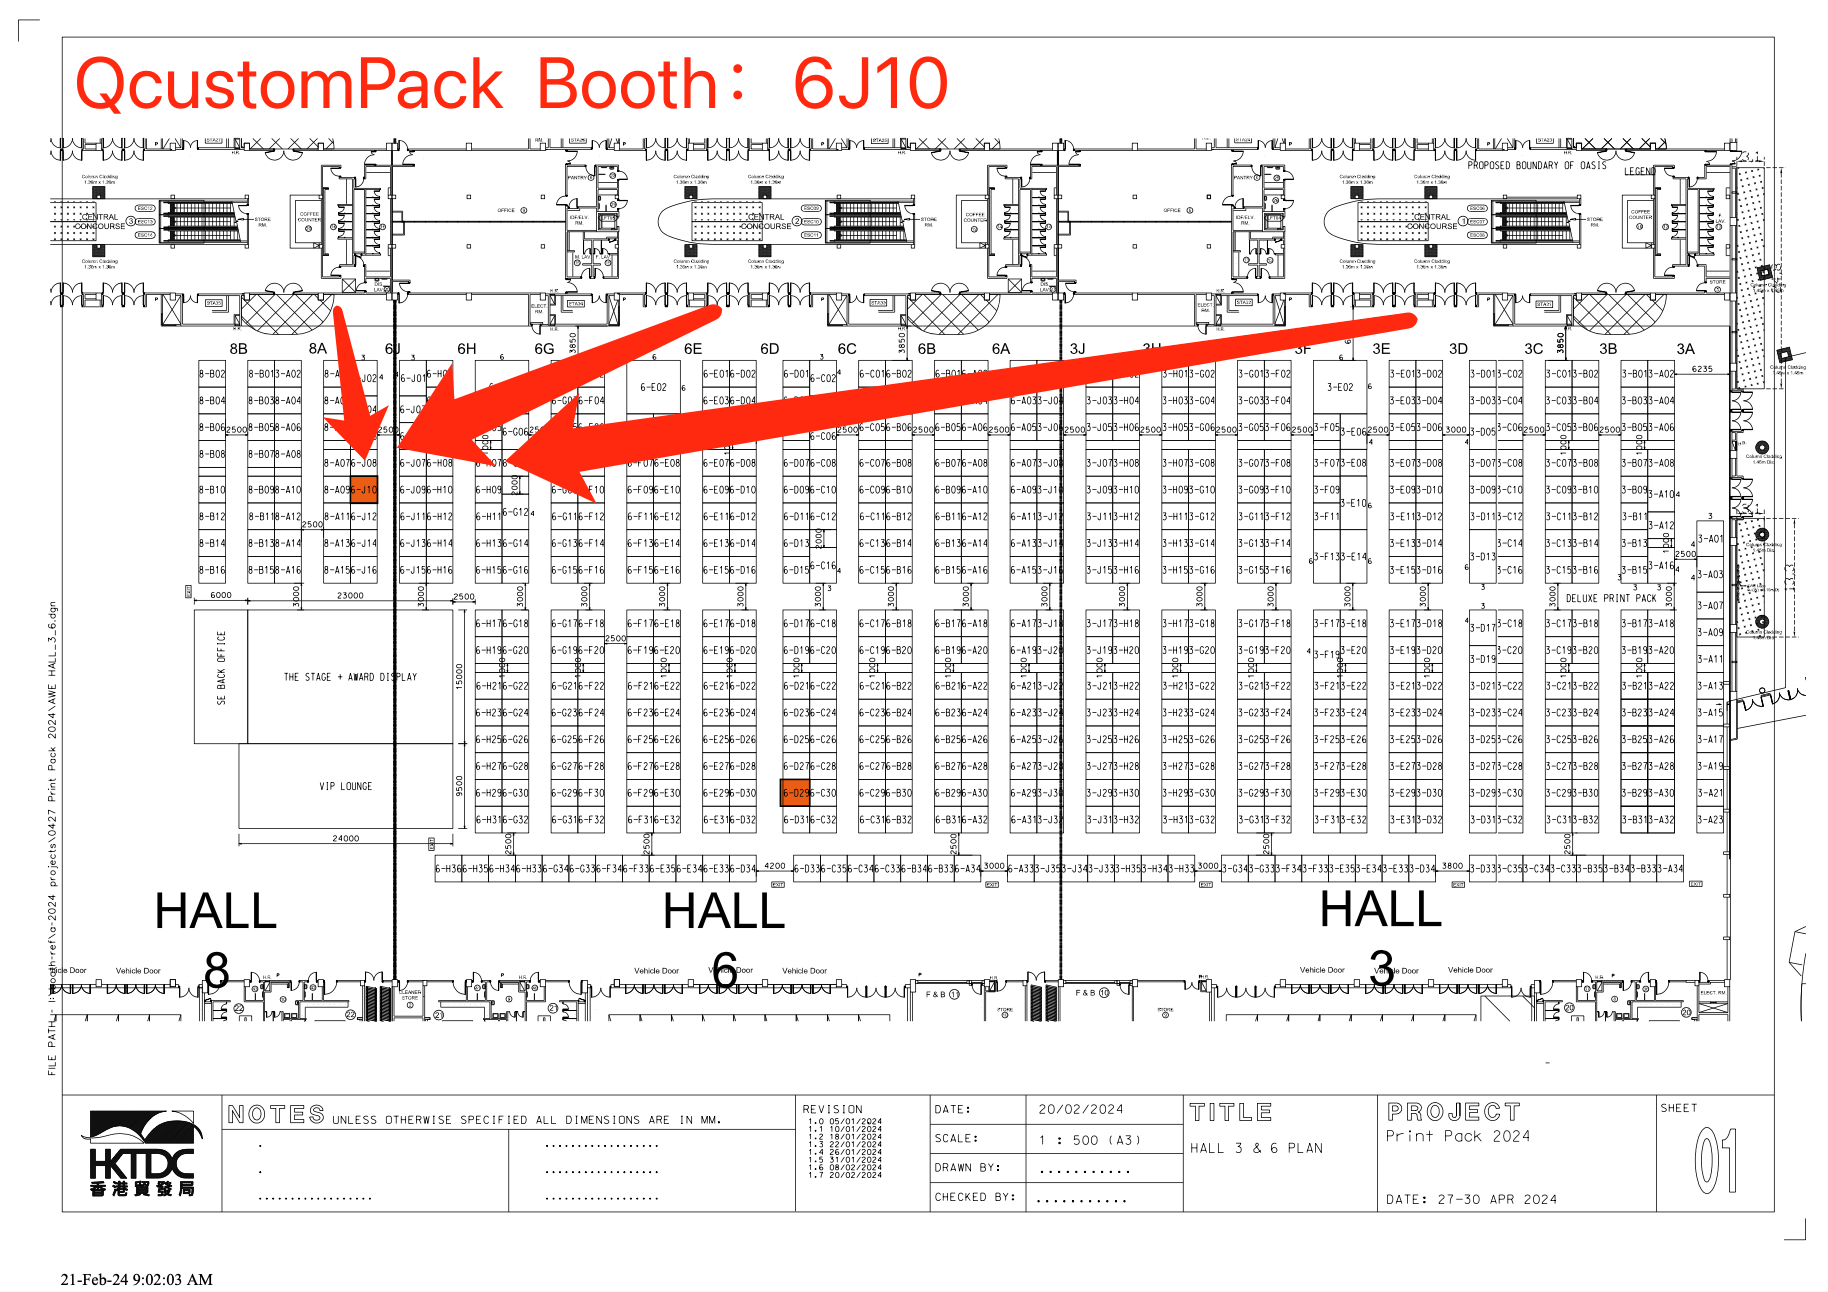 HP Print&pack exhibition location 20240427-30